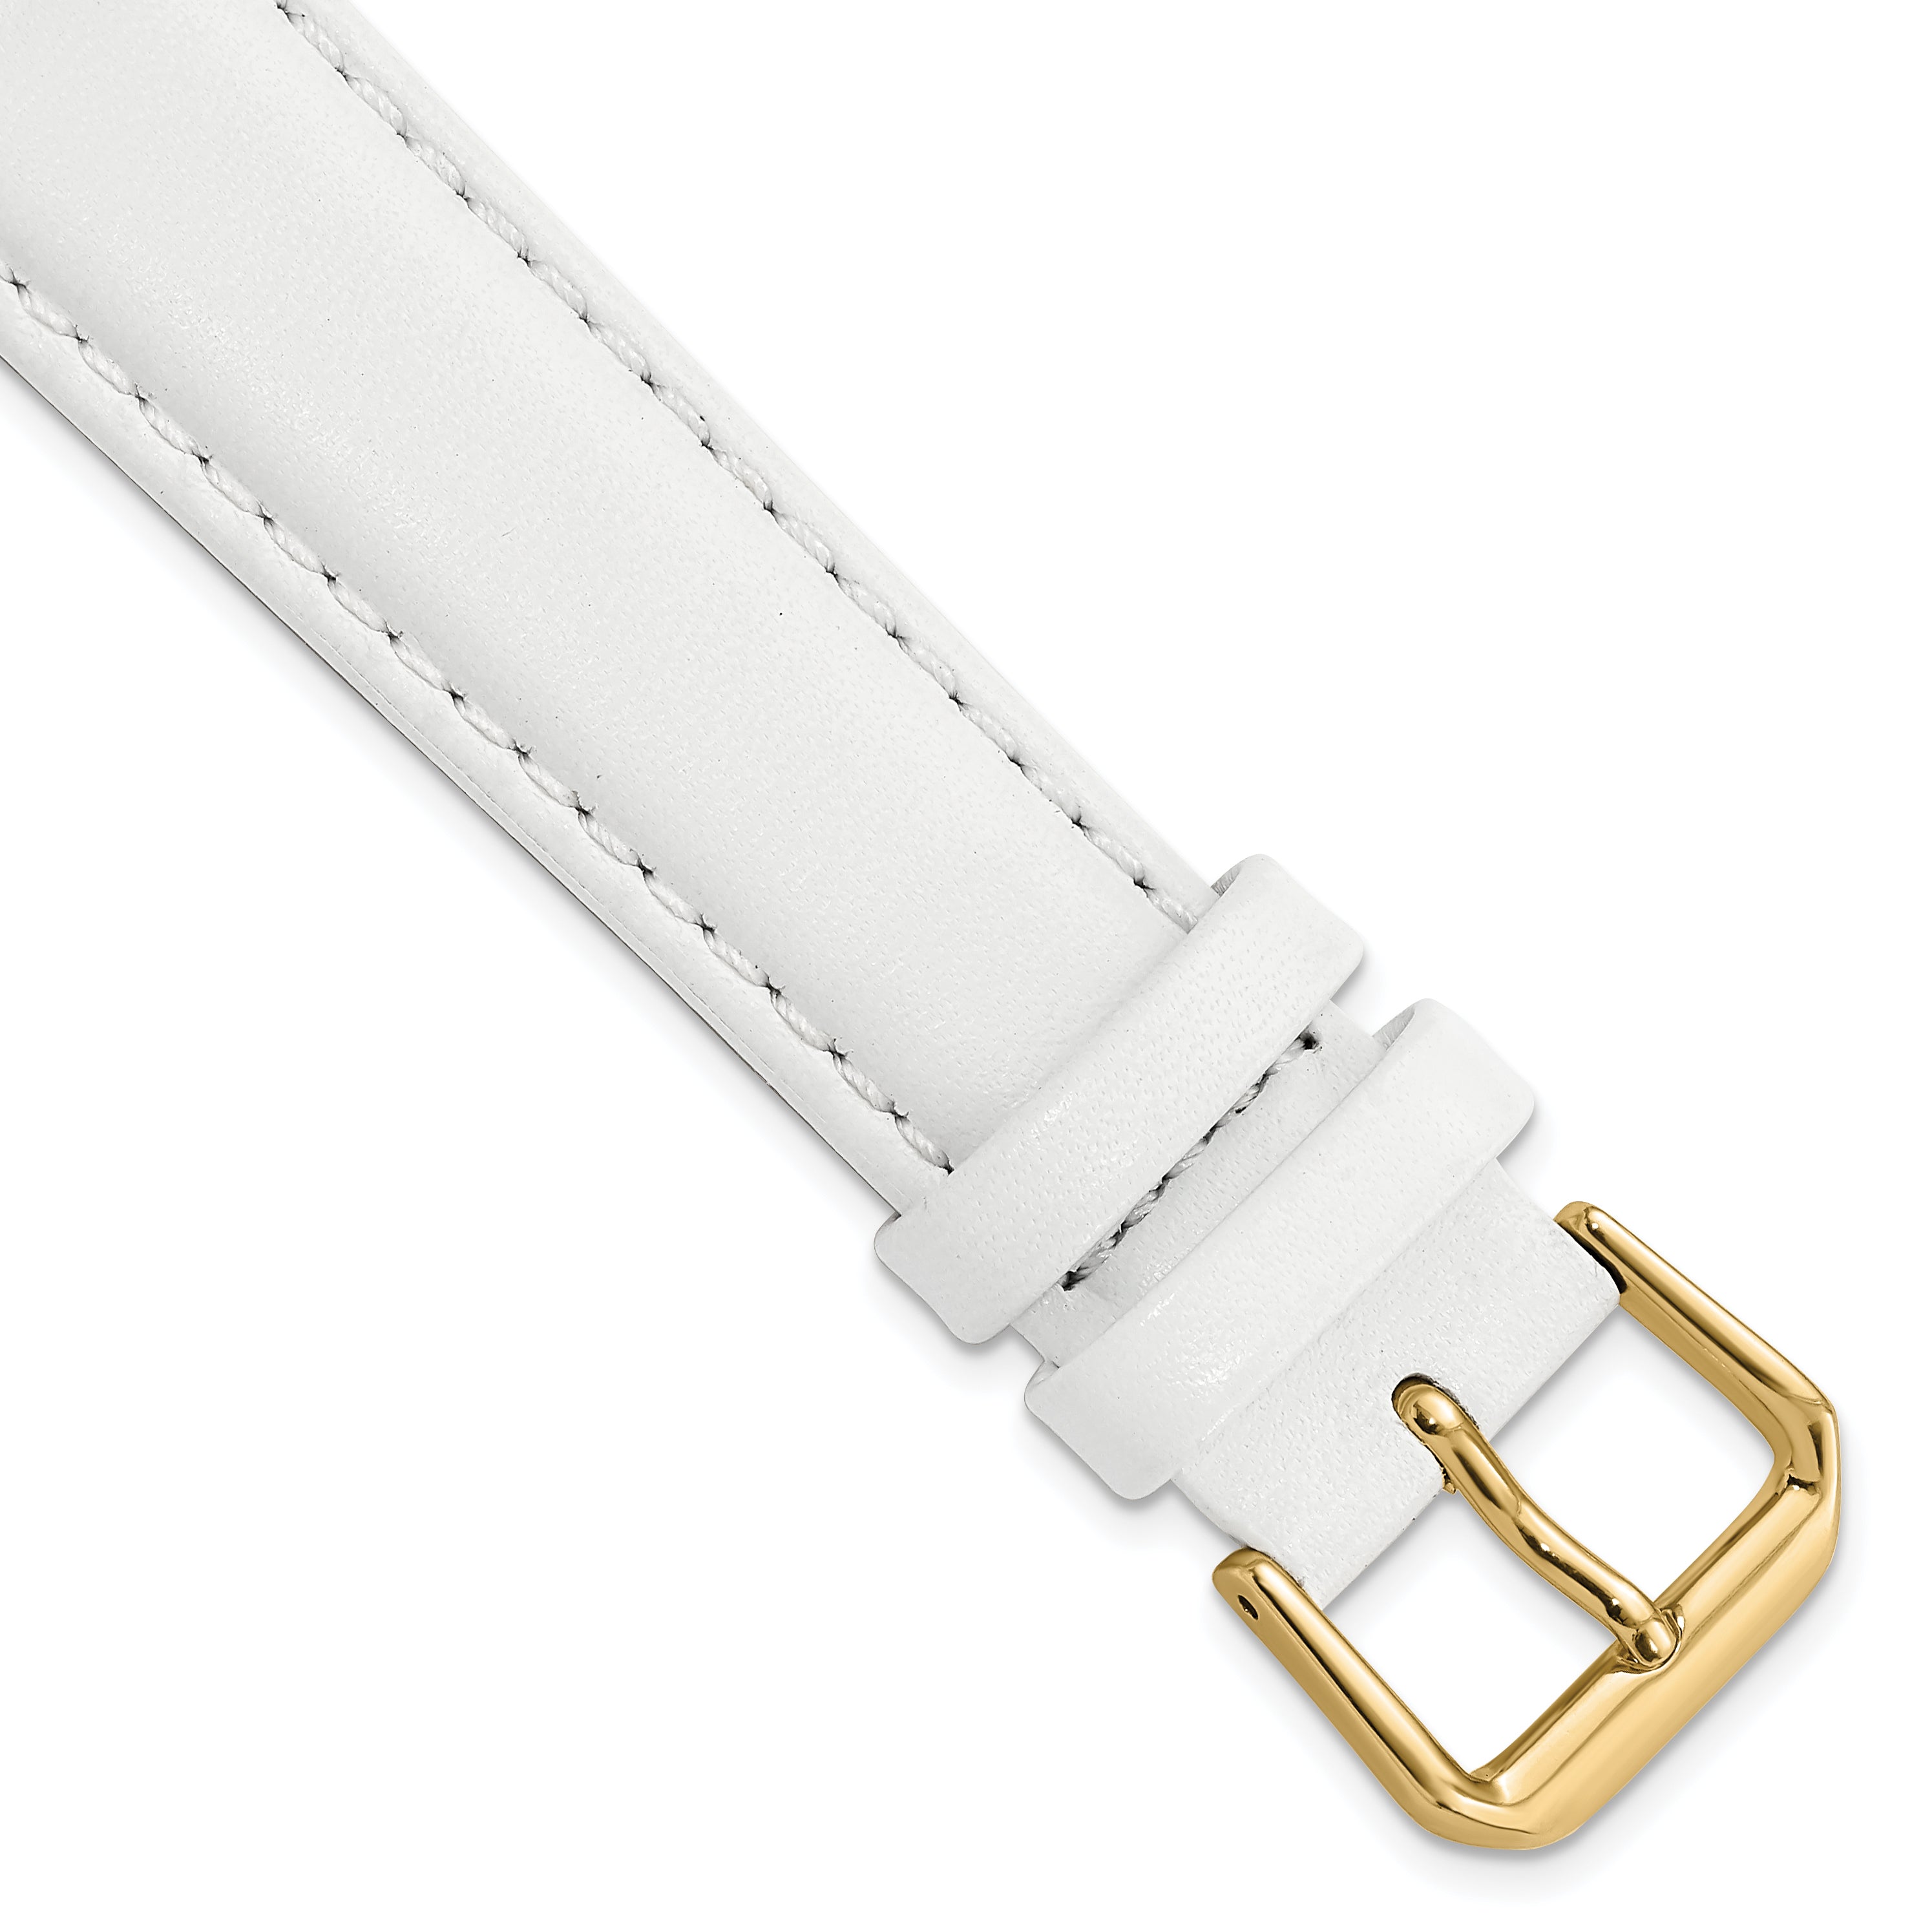 DeBeer 18mm White Smooth Leather with Gold-tone Buckle 7.5 inch Watch Band